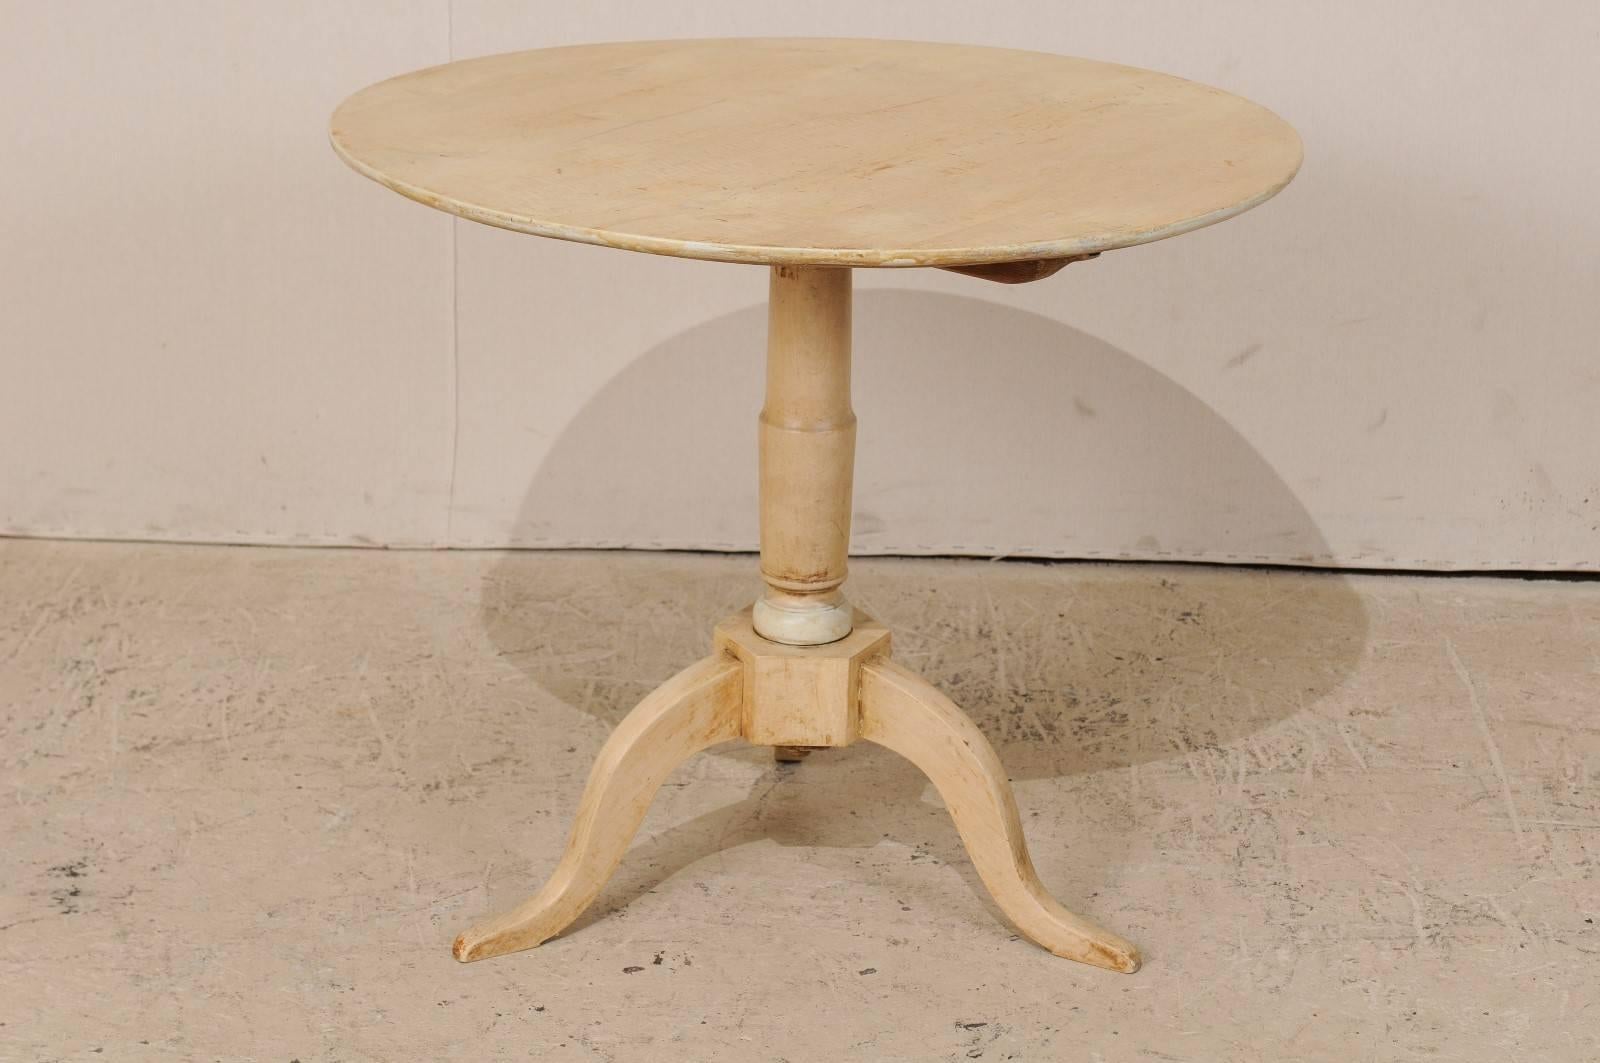 A Swedish 19th century round occasional table. This Swedish table, circa 1860, features a round top with a central pedestal column and tripod feet. The table is made of a bleached birch wood and there is a hint of accent paint around the base of the